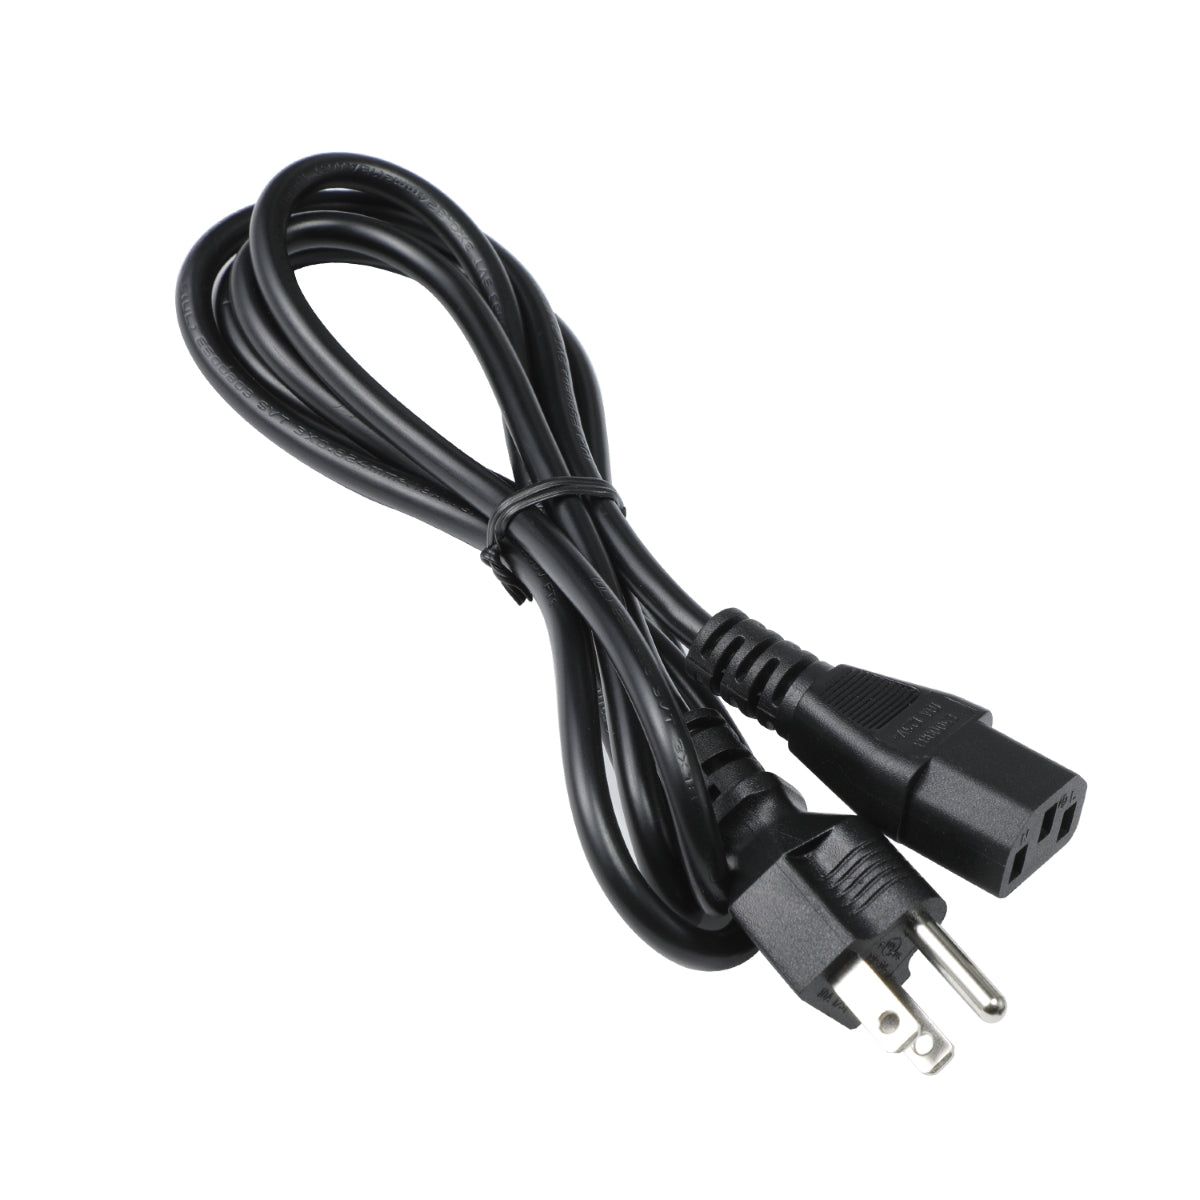 Power Cord for HP Pavilion Power 580-005t Computer.